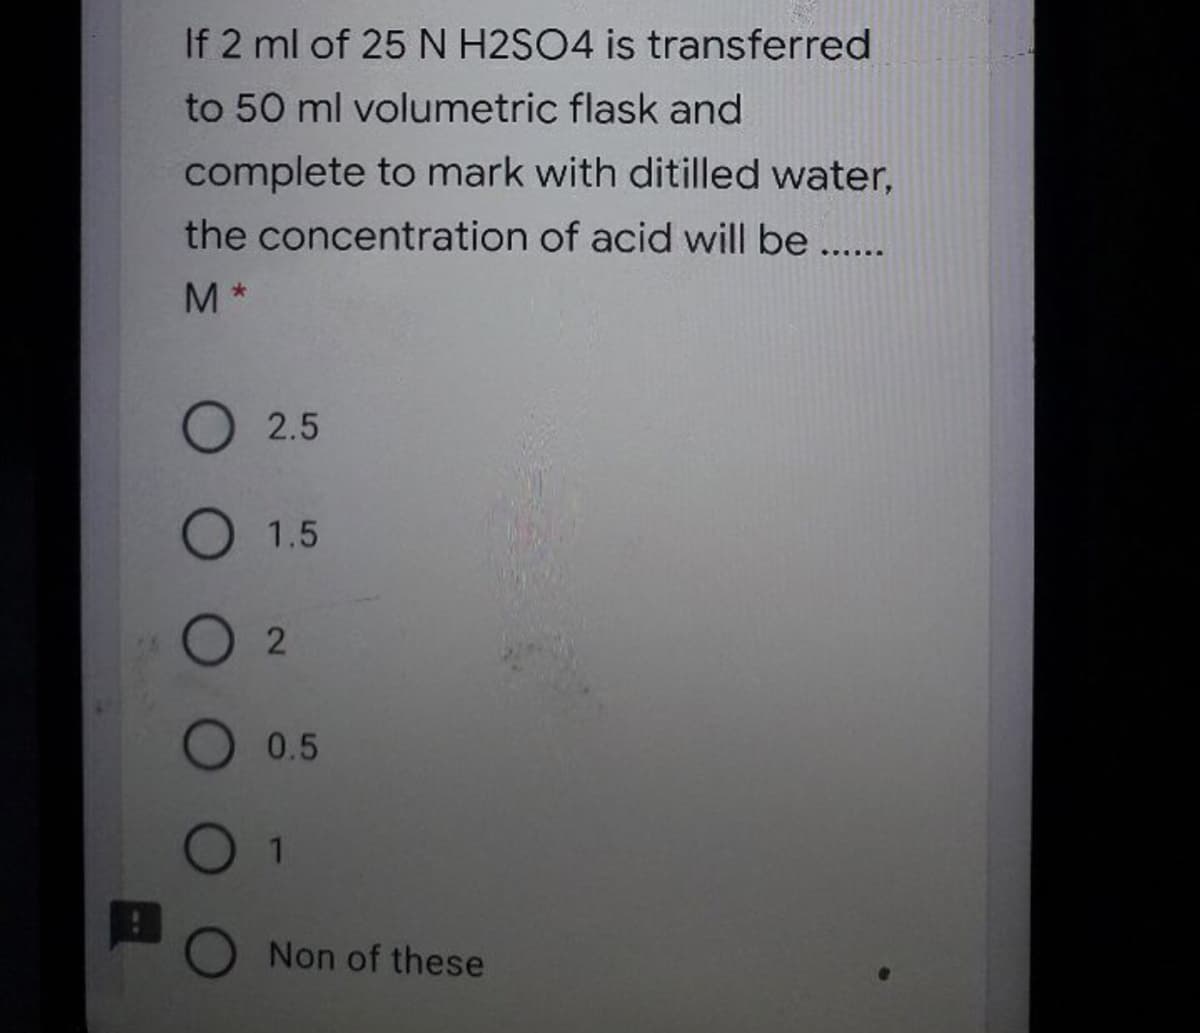 If 2 ml of 25 N H2SO4 is transferred
to 50 ml volumetric flask and
complete to mark with ditilled water,
the concentration of acid will be ..
M*
O 2.5
O 1.5
2
O 0.5
0 1
Non of these
